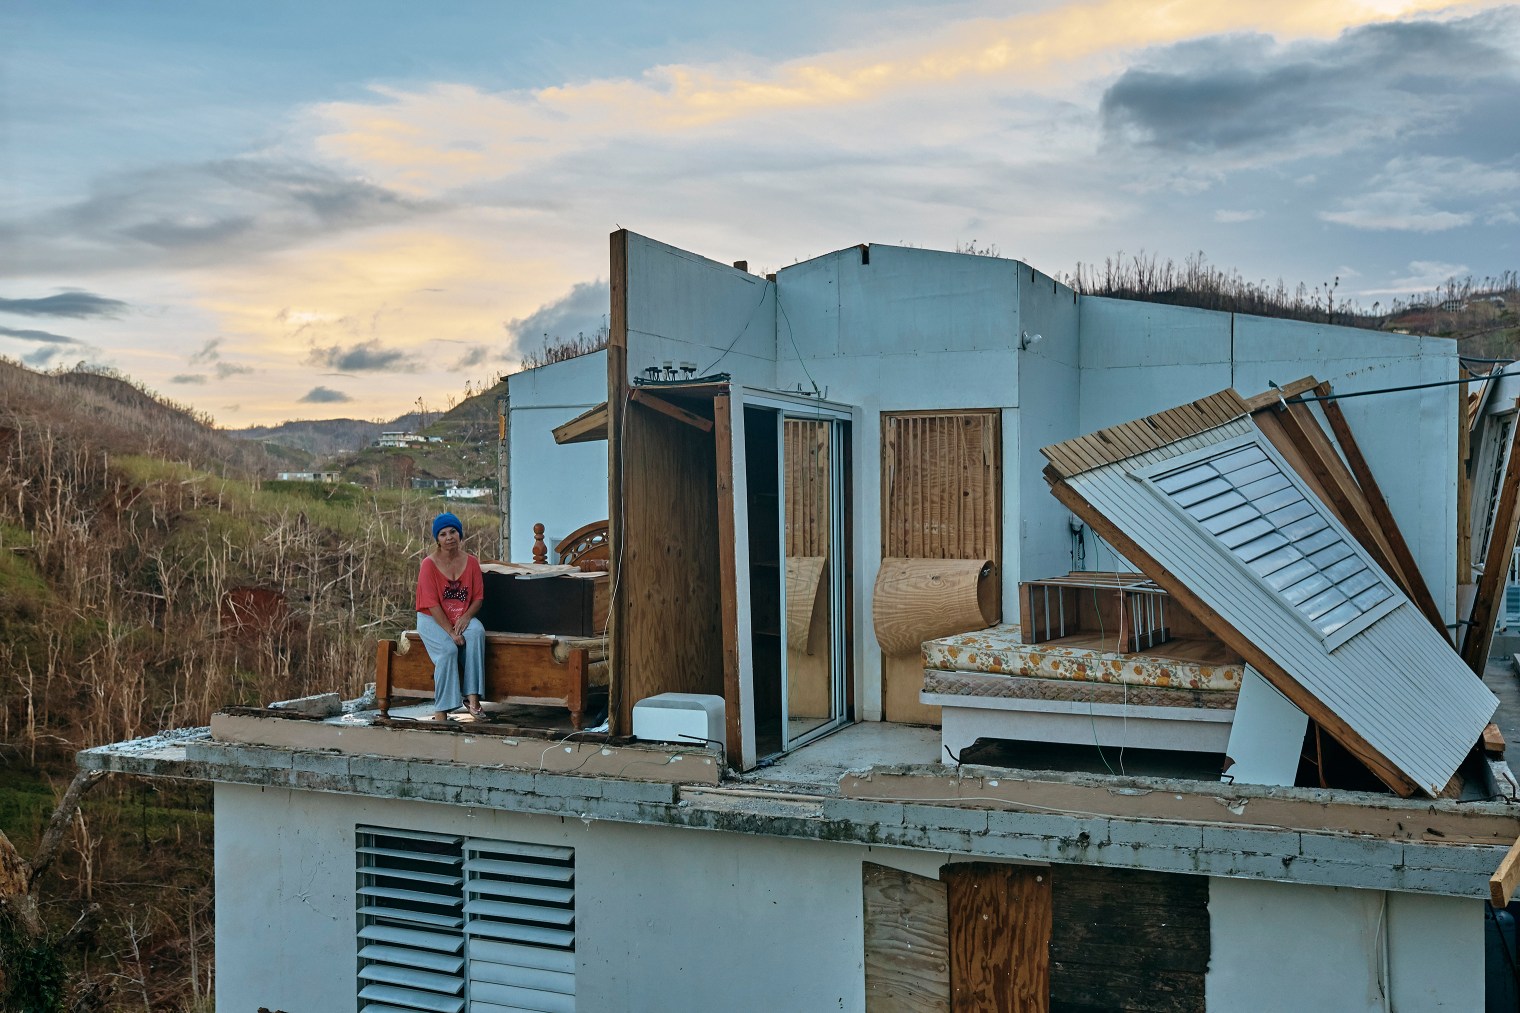 Wilmair Flores, 55, poses on a bed at her house damaged by Hurricane Maria in Barranquitas, Puerto Rico, Oct. 2, 2017